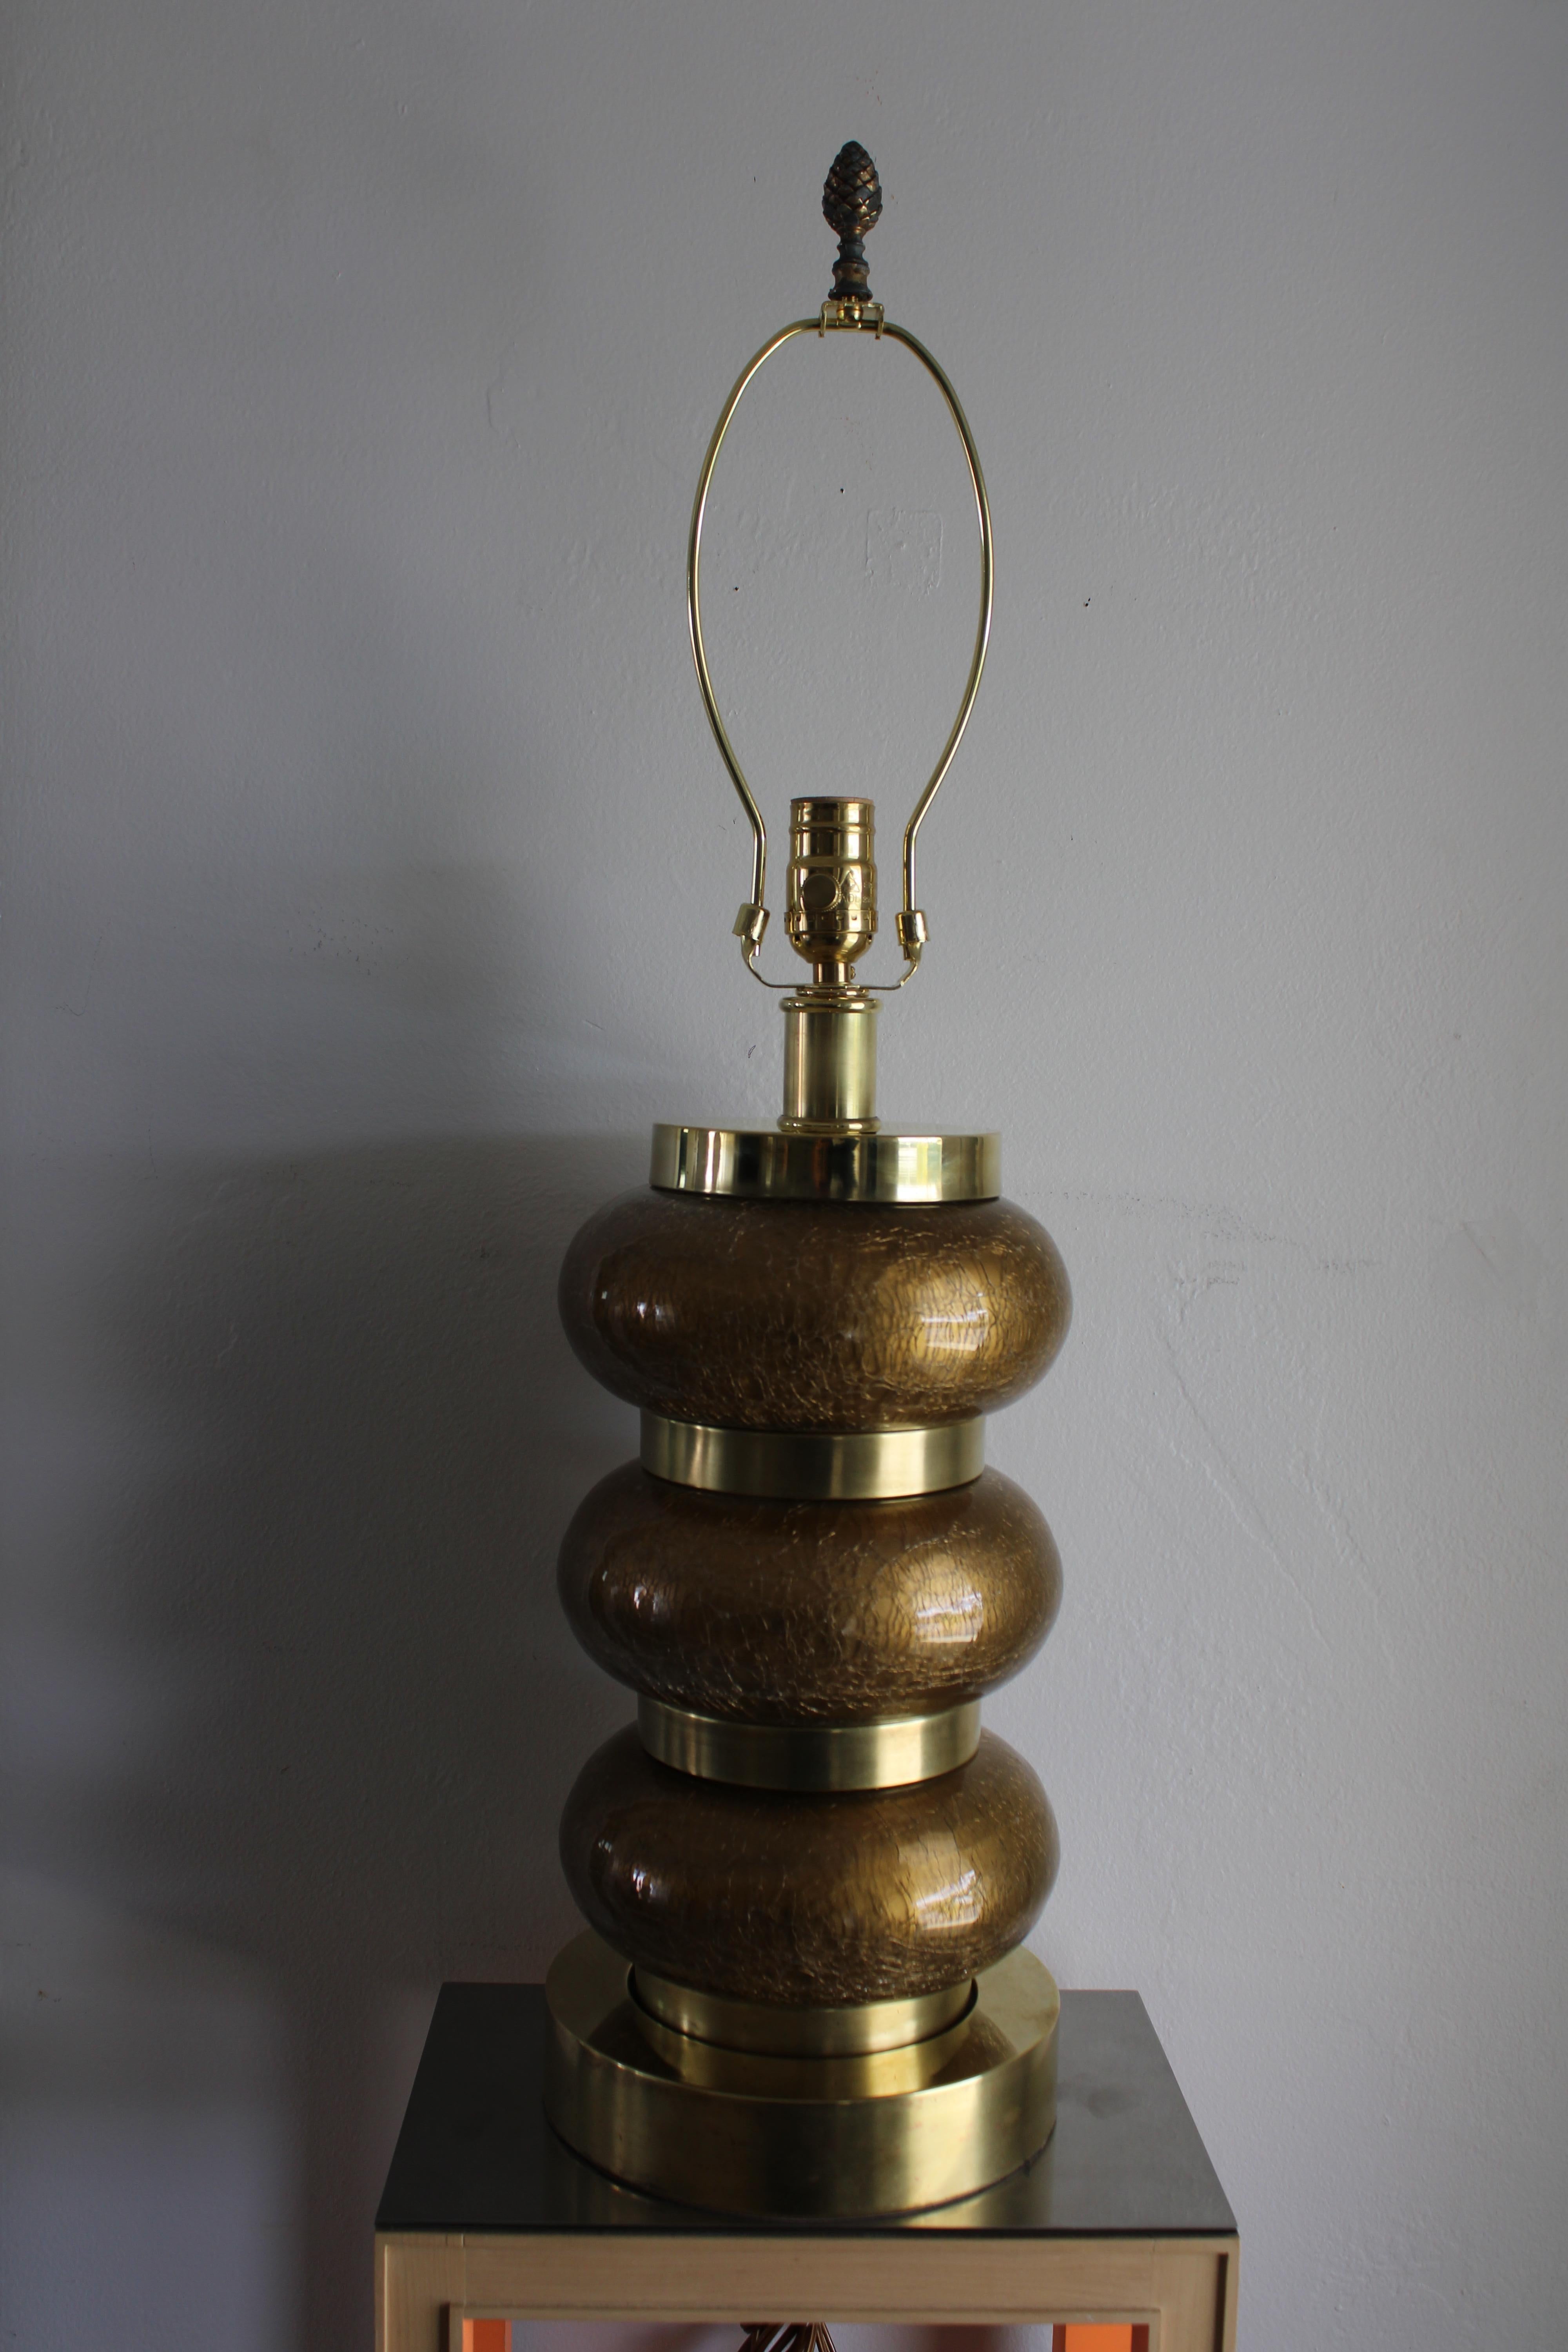 Reverse gilt and brass table lamp by the Paul Hanson Co. It consists of three alternating bands of gilt crackle glass ovals and patinated brass rings. Lamp measures 17